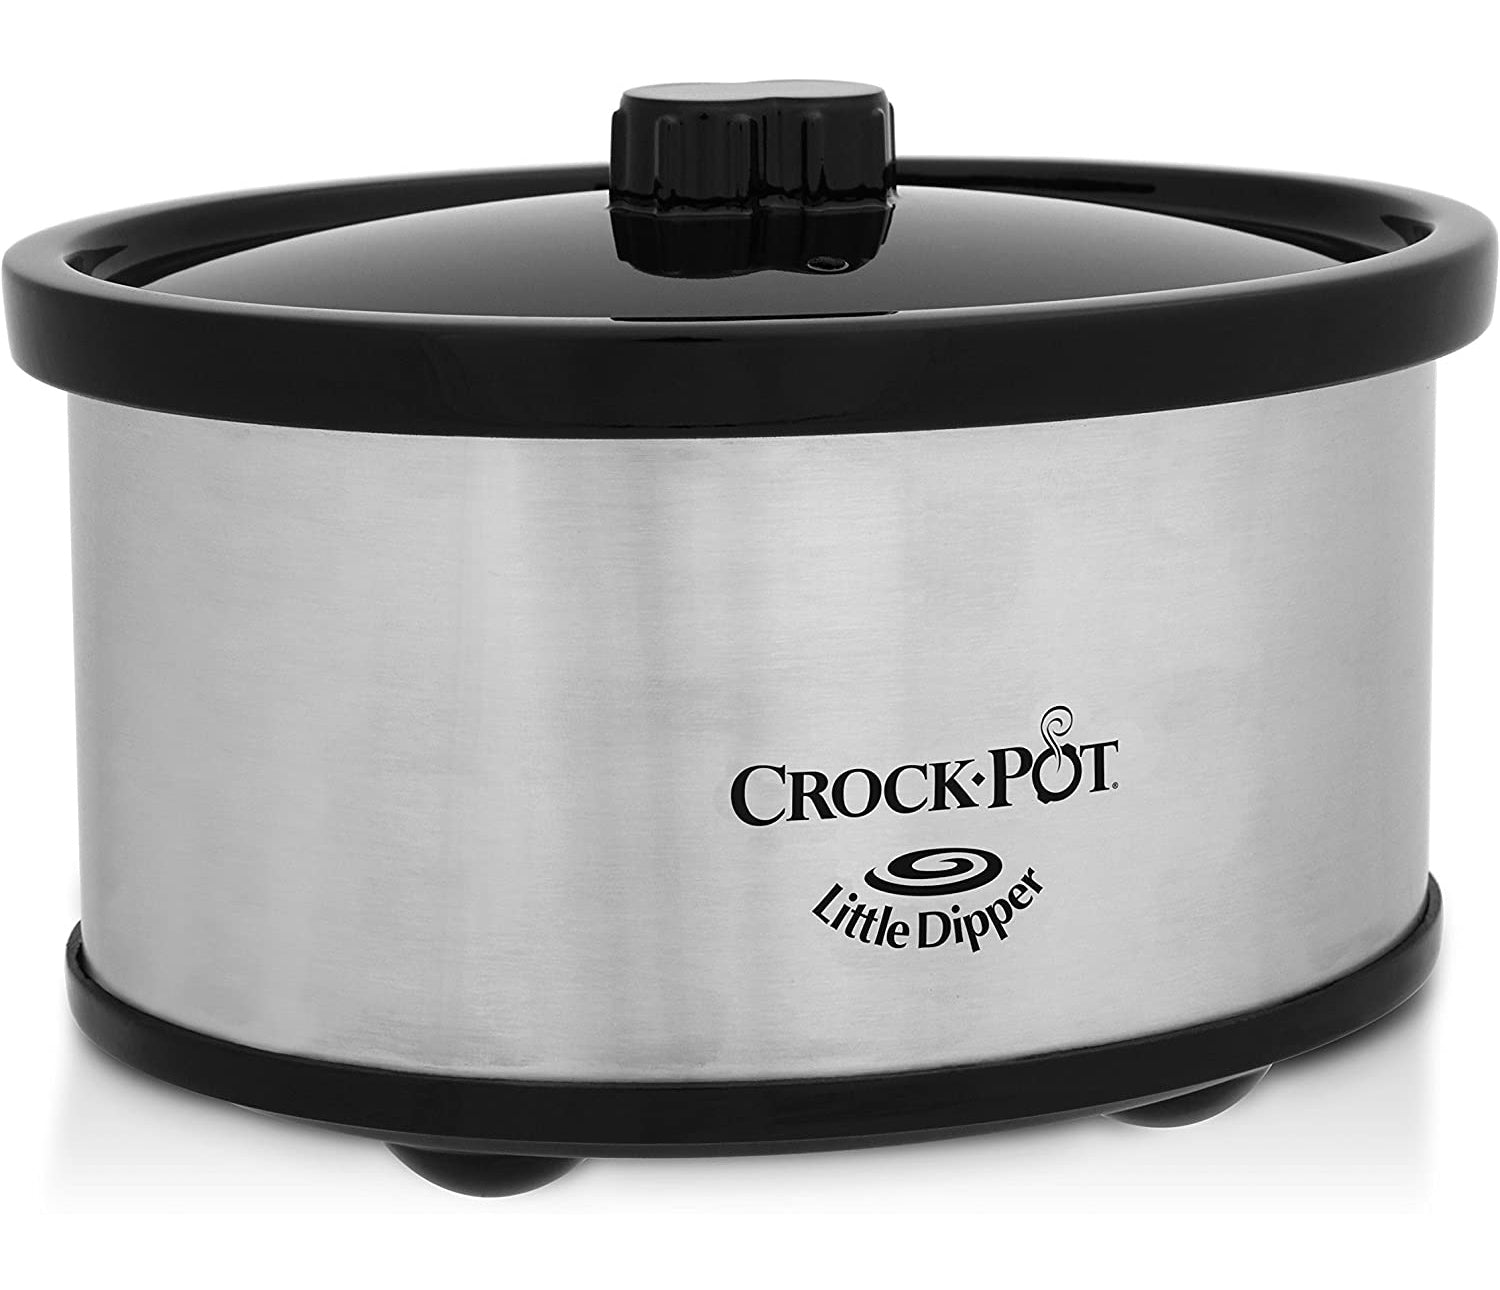 Crock-Pot Slow Cooker with Little Dipper Warmer, 2 pc - Fred Meyer